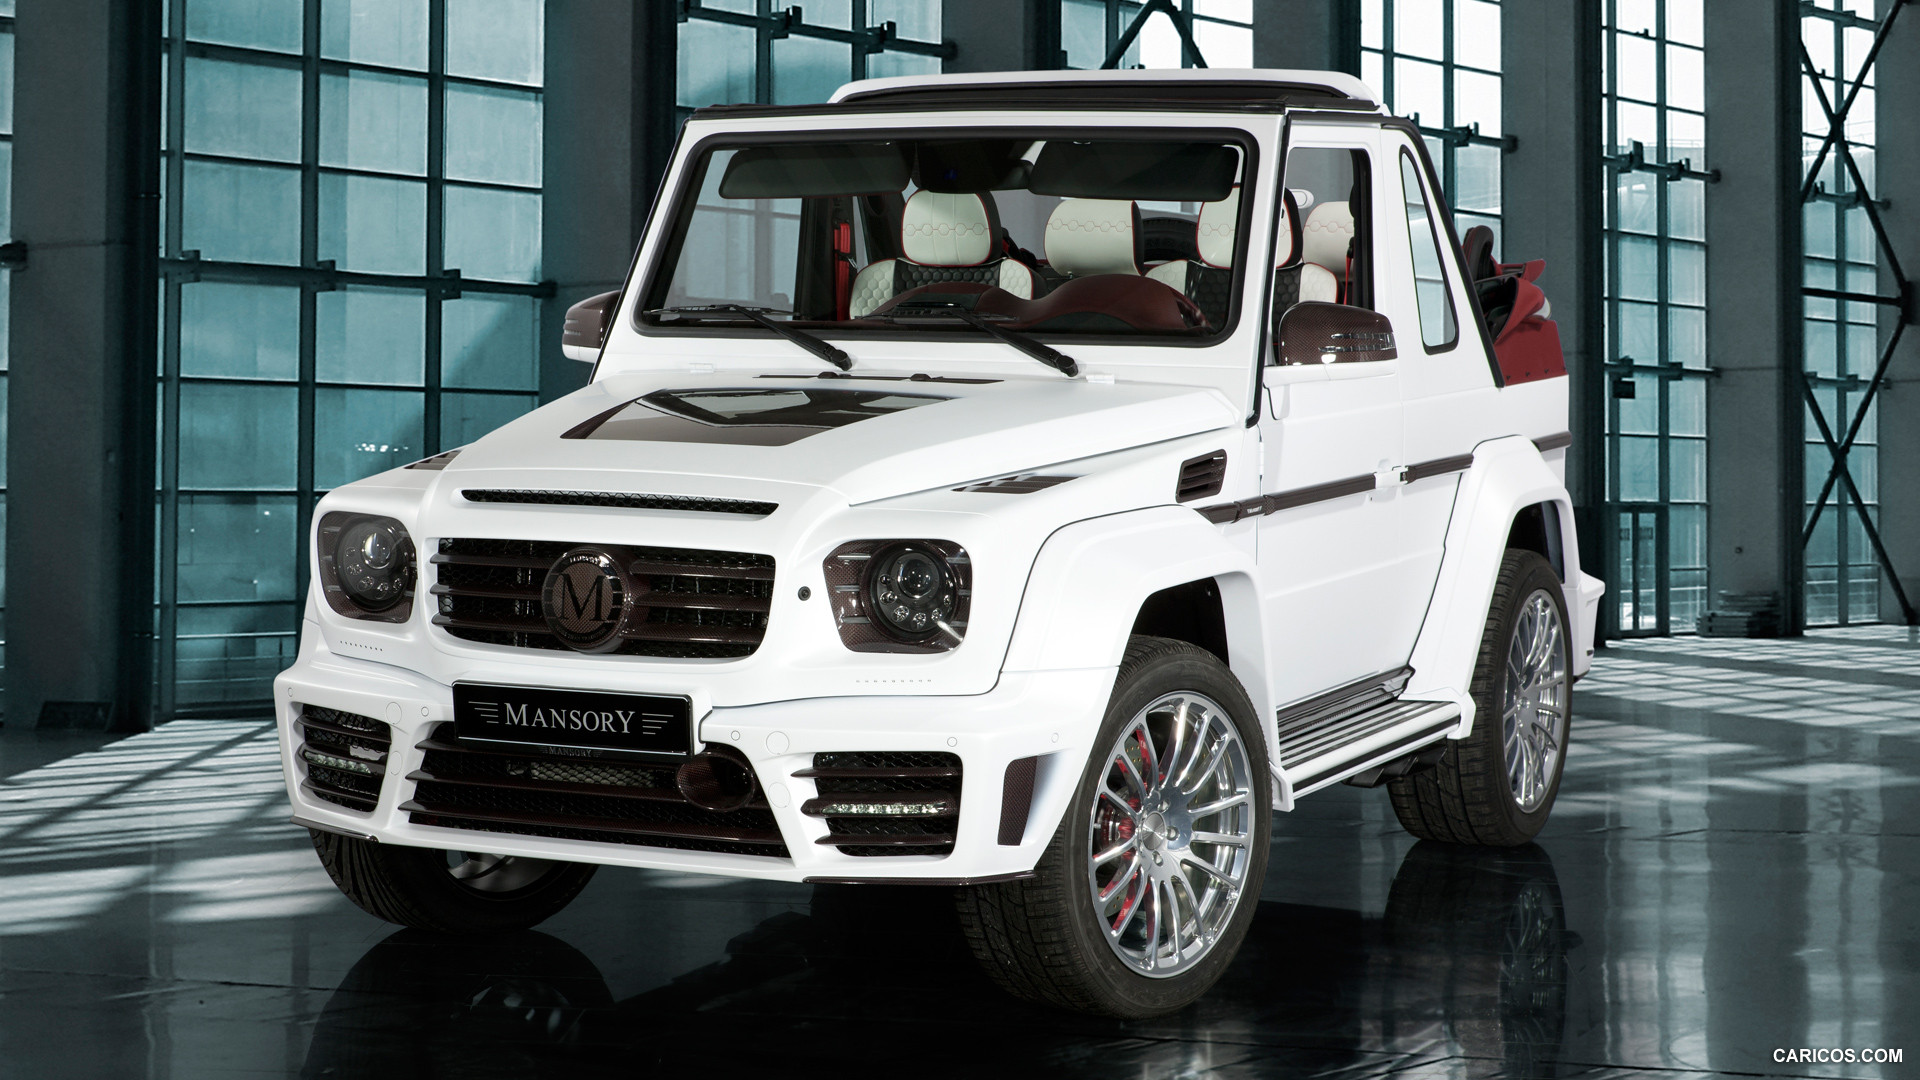 2013 Mansory Speranza based on M-Benz G-Class Cabrio  - Front, #1 of 5